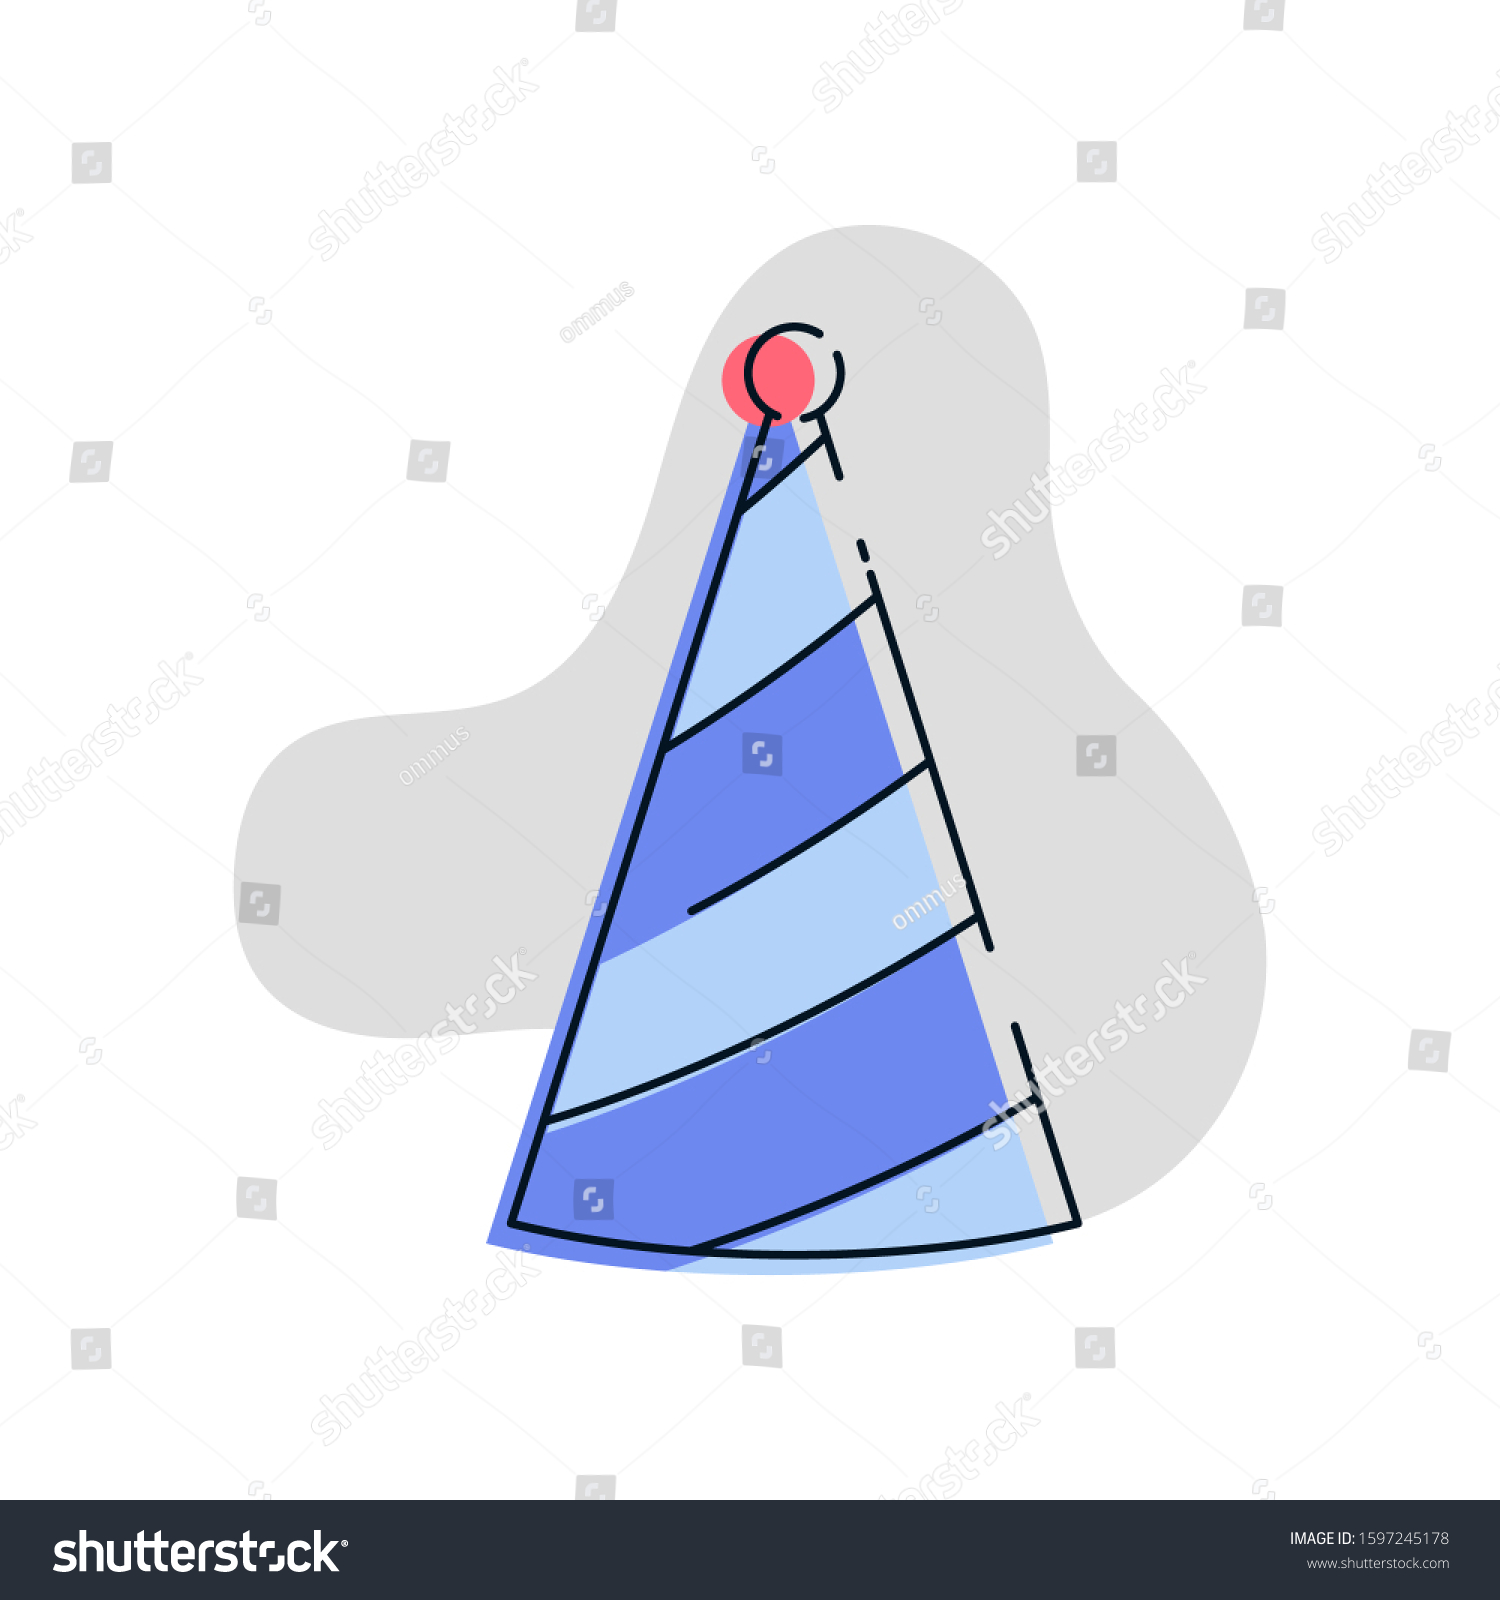 Striped Party Hat Vector Icon Illustration Stock Vector (Royalty Free ...